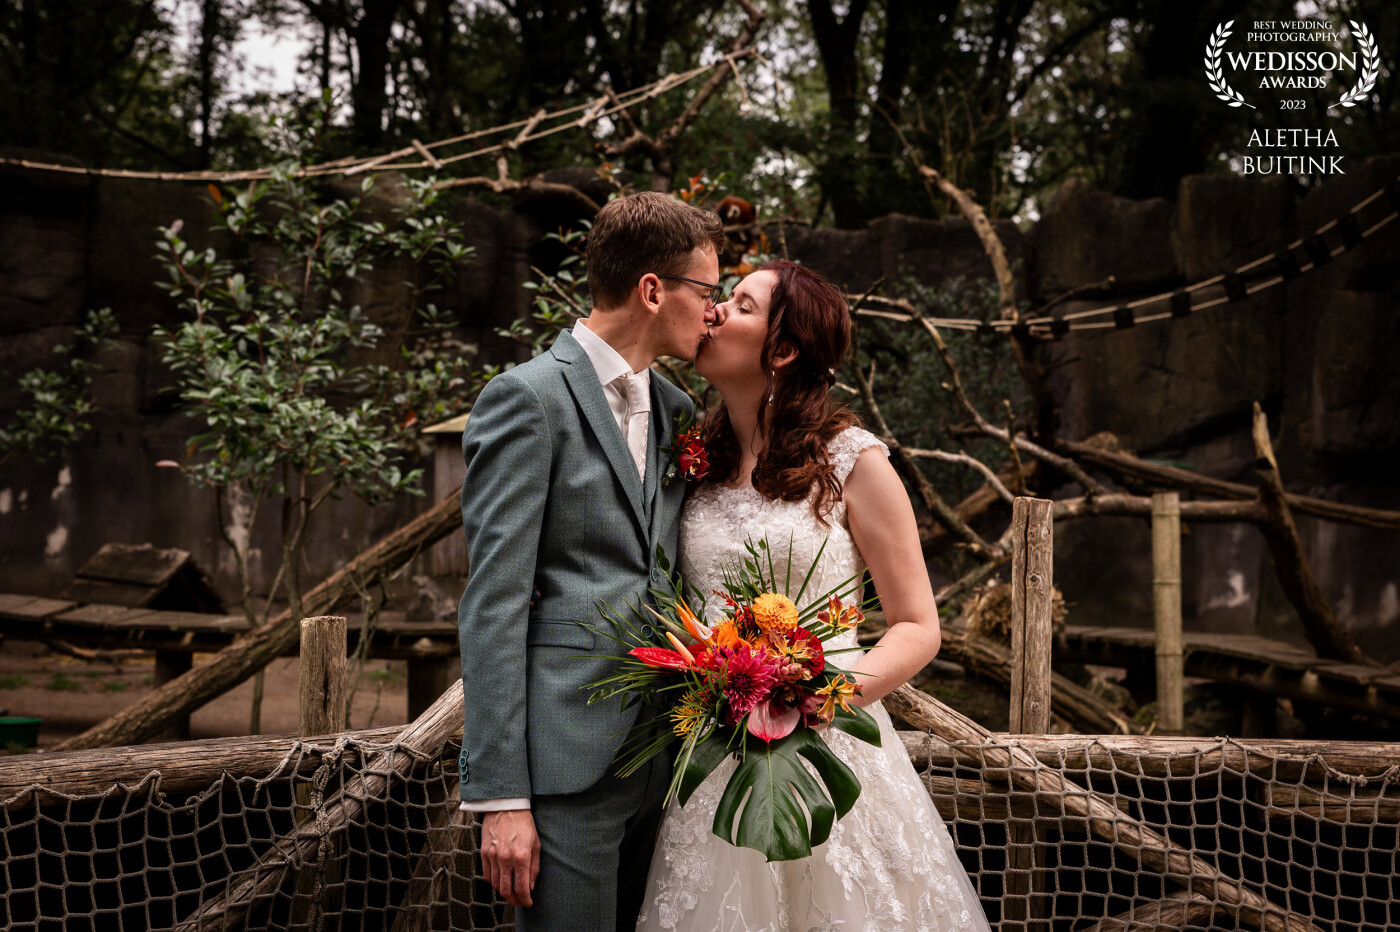 This photo is taken at the zoo where this couple got married.  The lines in the photo and the brown panda in the background brings everything together.